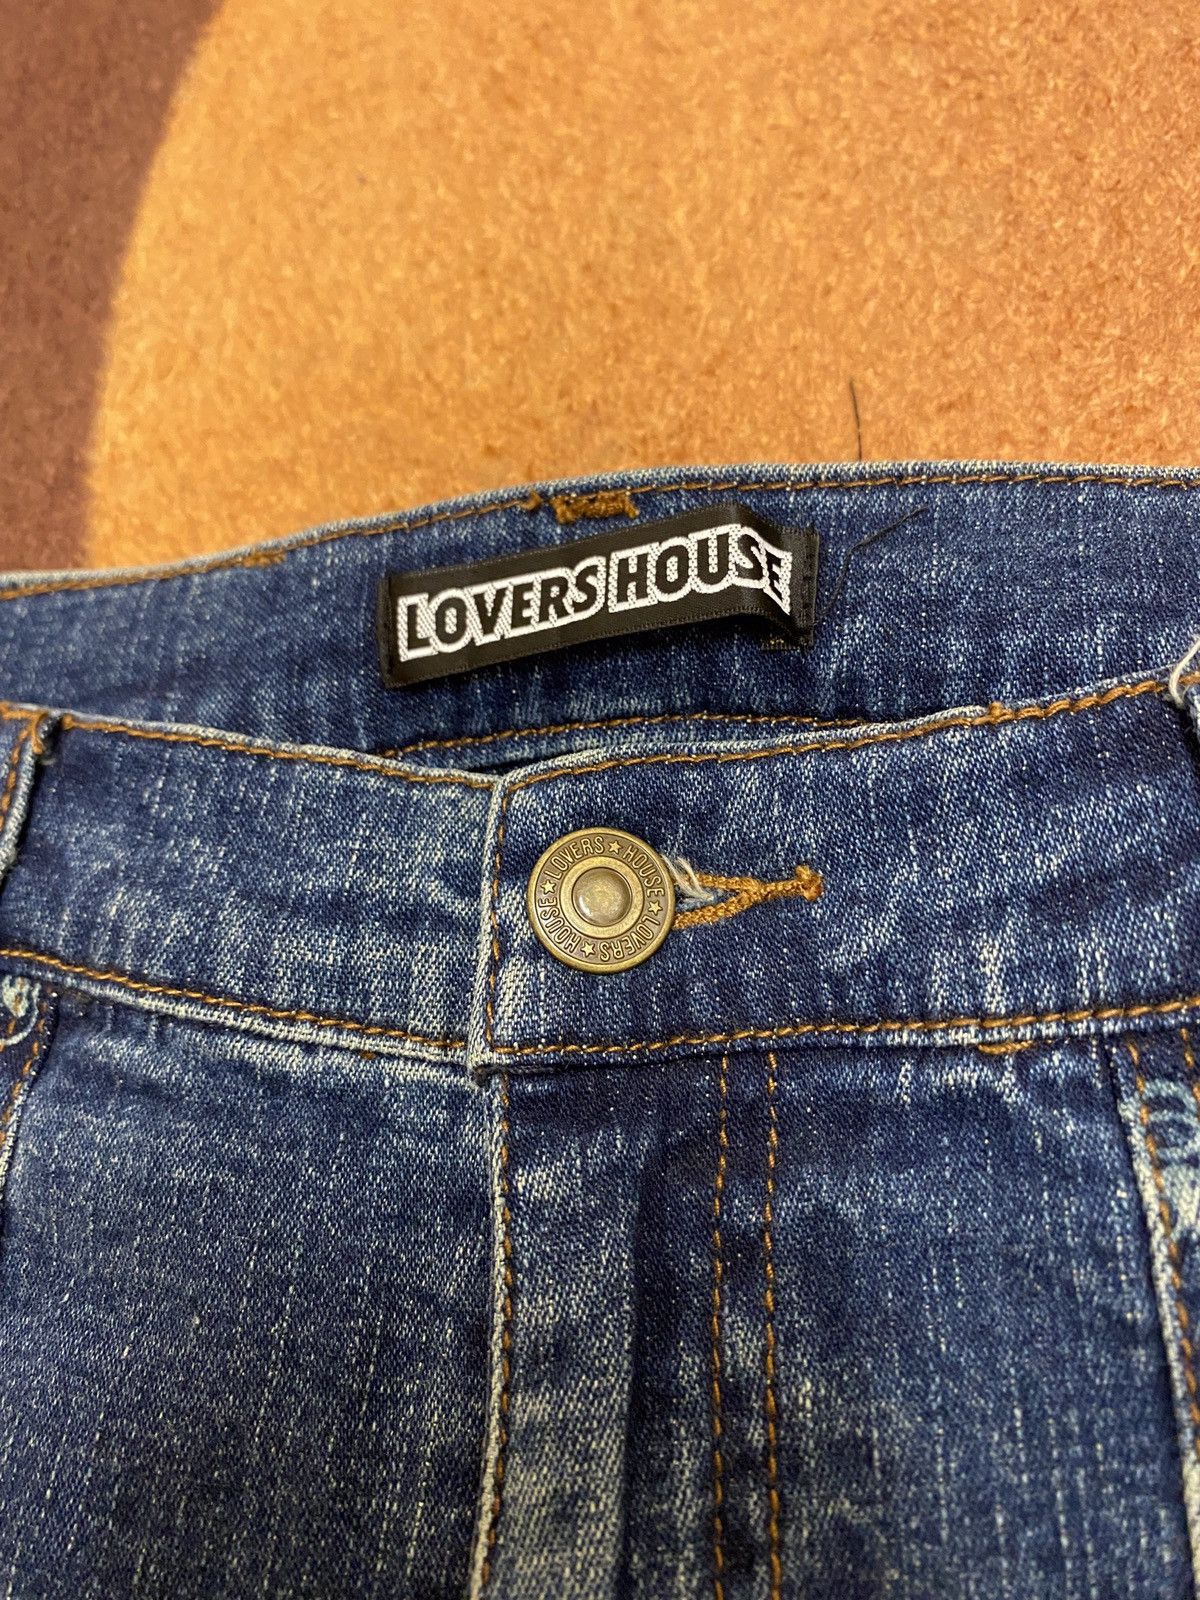 Japanese Brand - Super Lovers / Lovers House Bootcut Jeans - 7